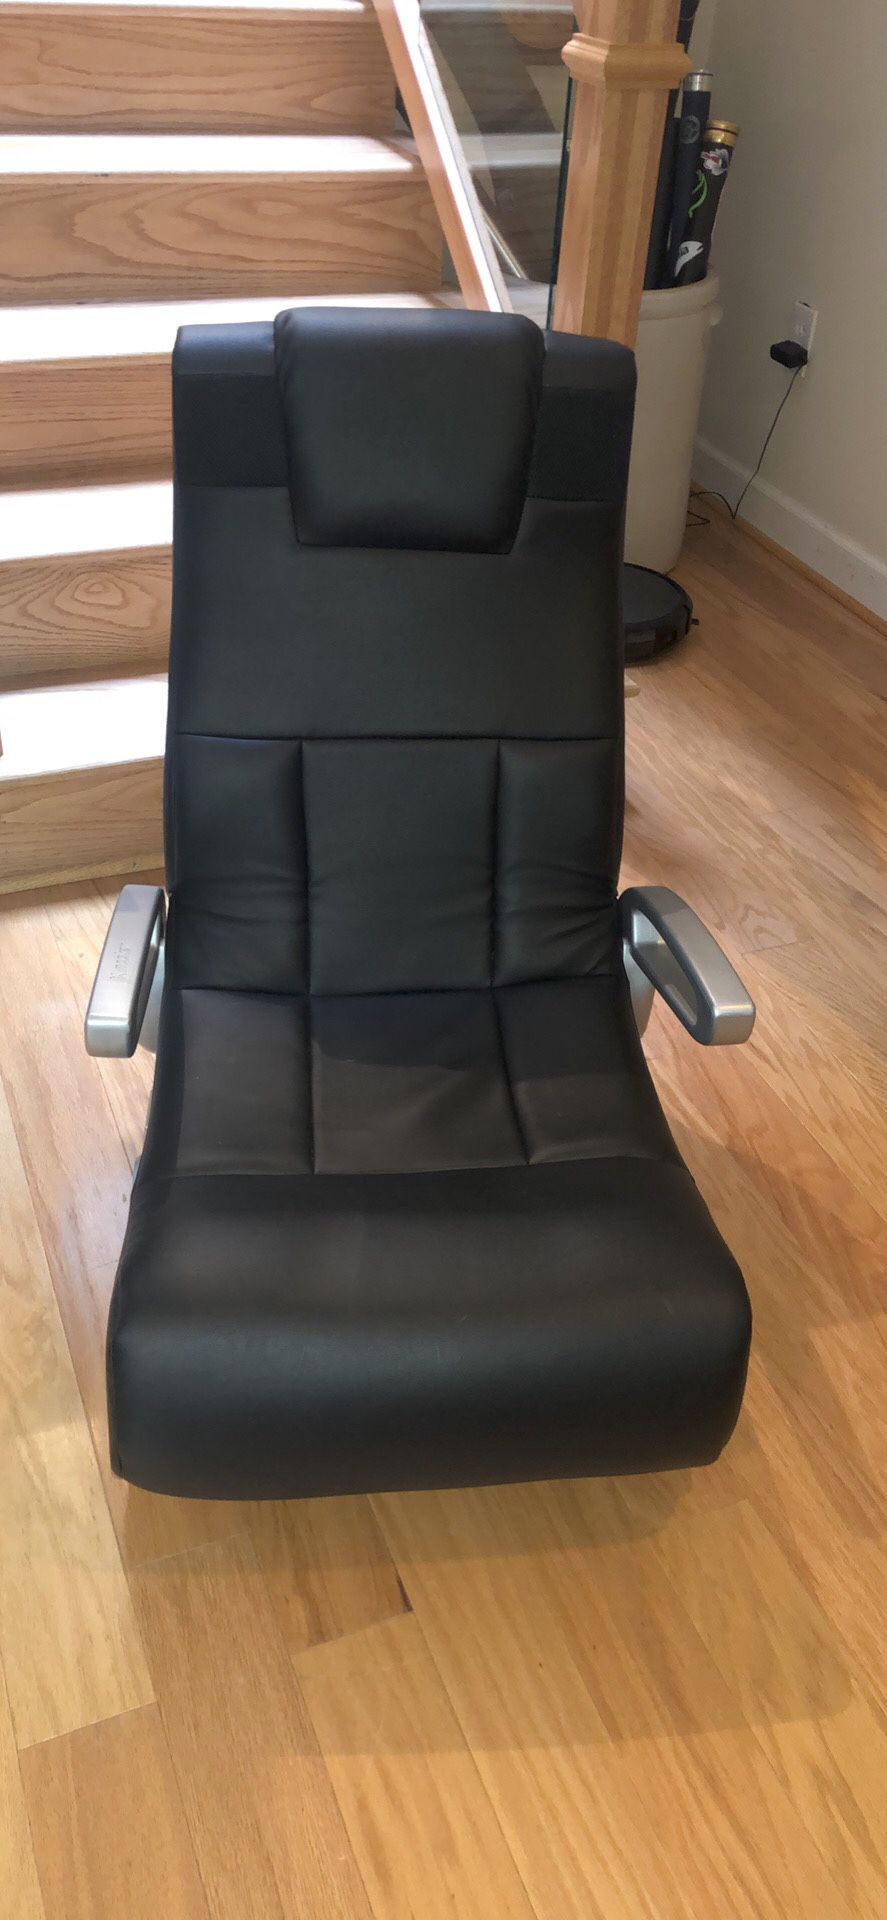 $40 - X-Rocker Gaming Chair with Speakers- ONLY ONE AVAILABLE